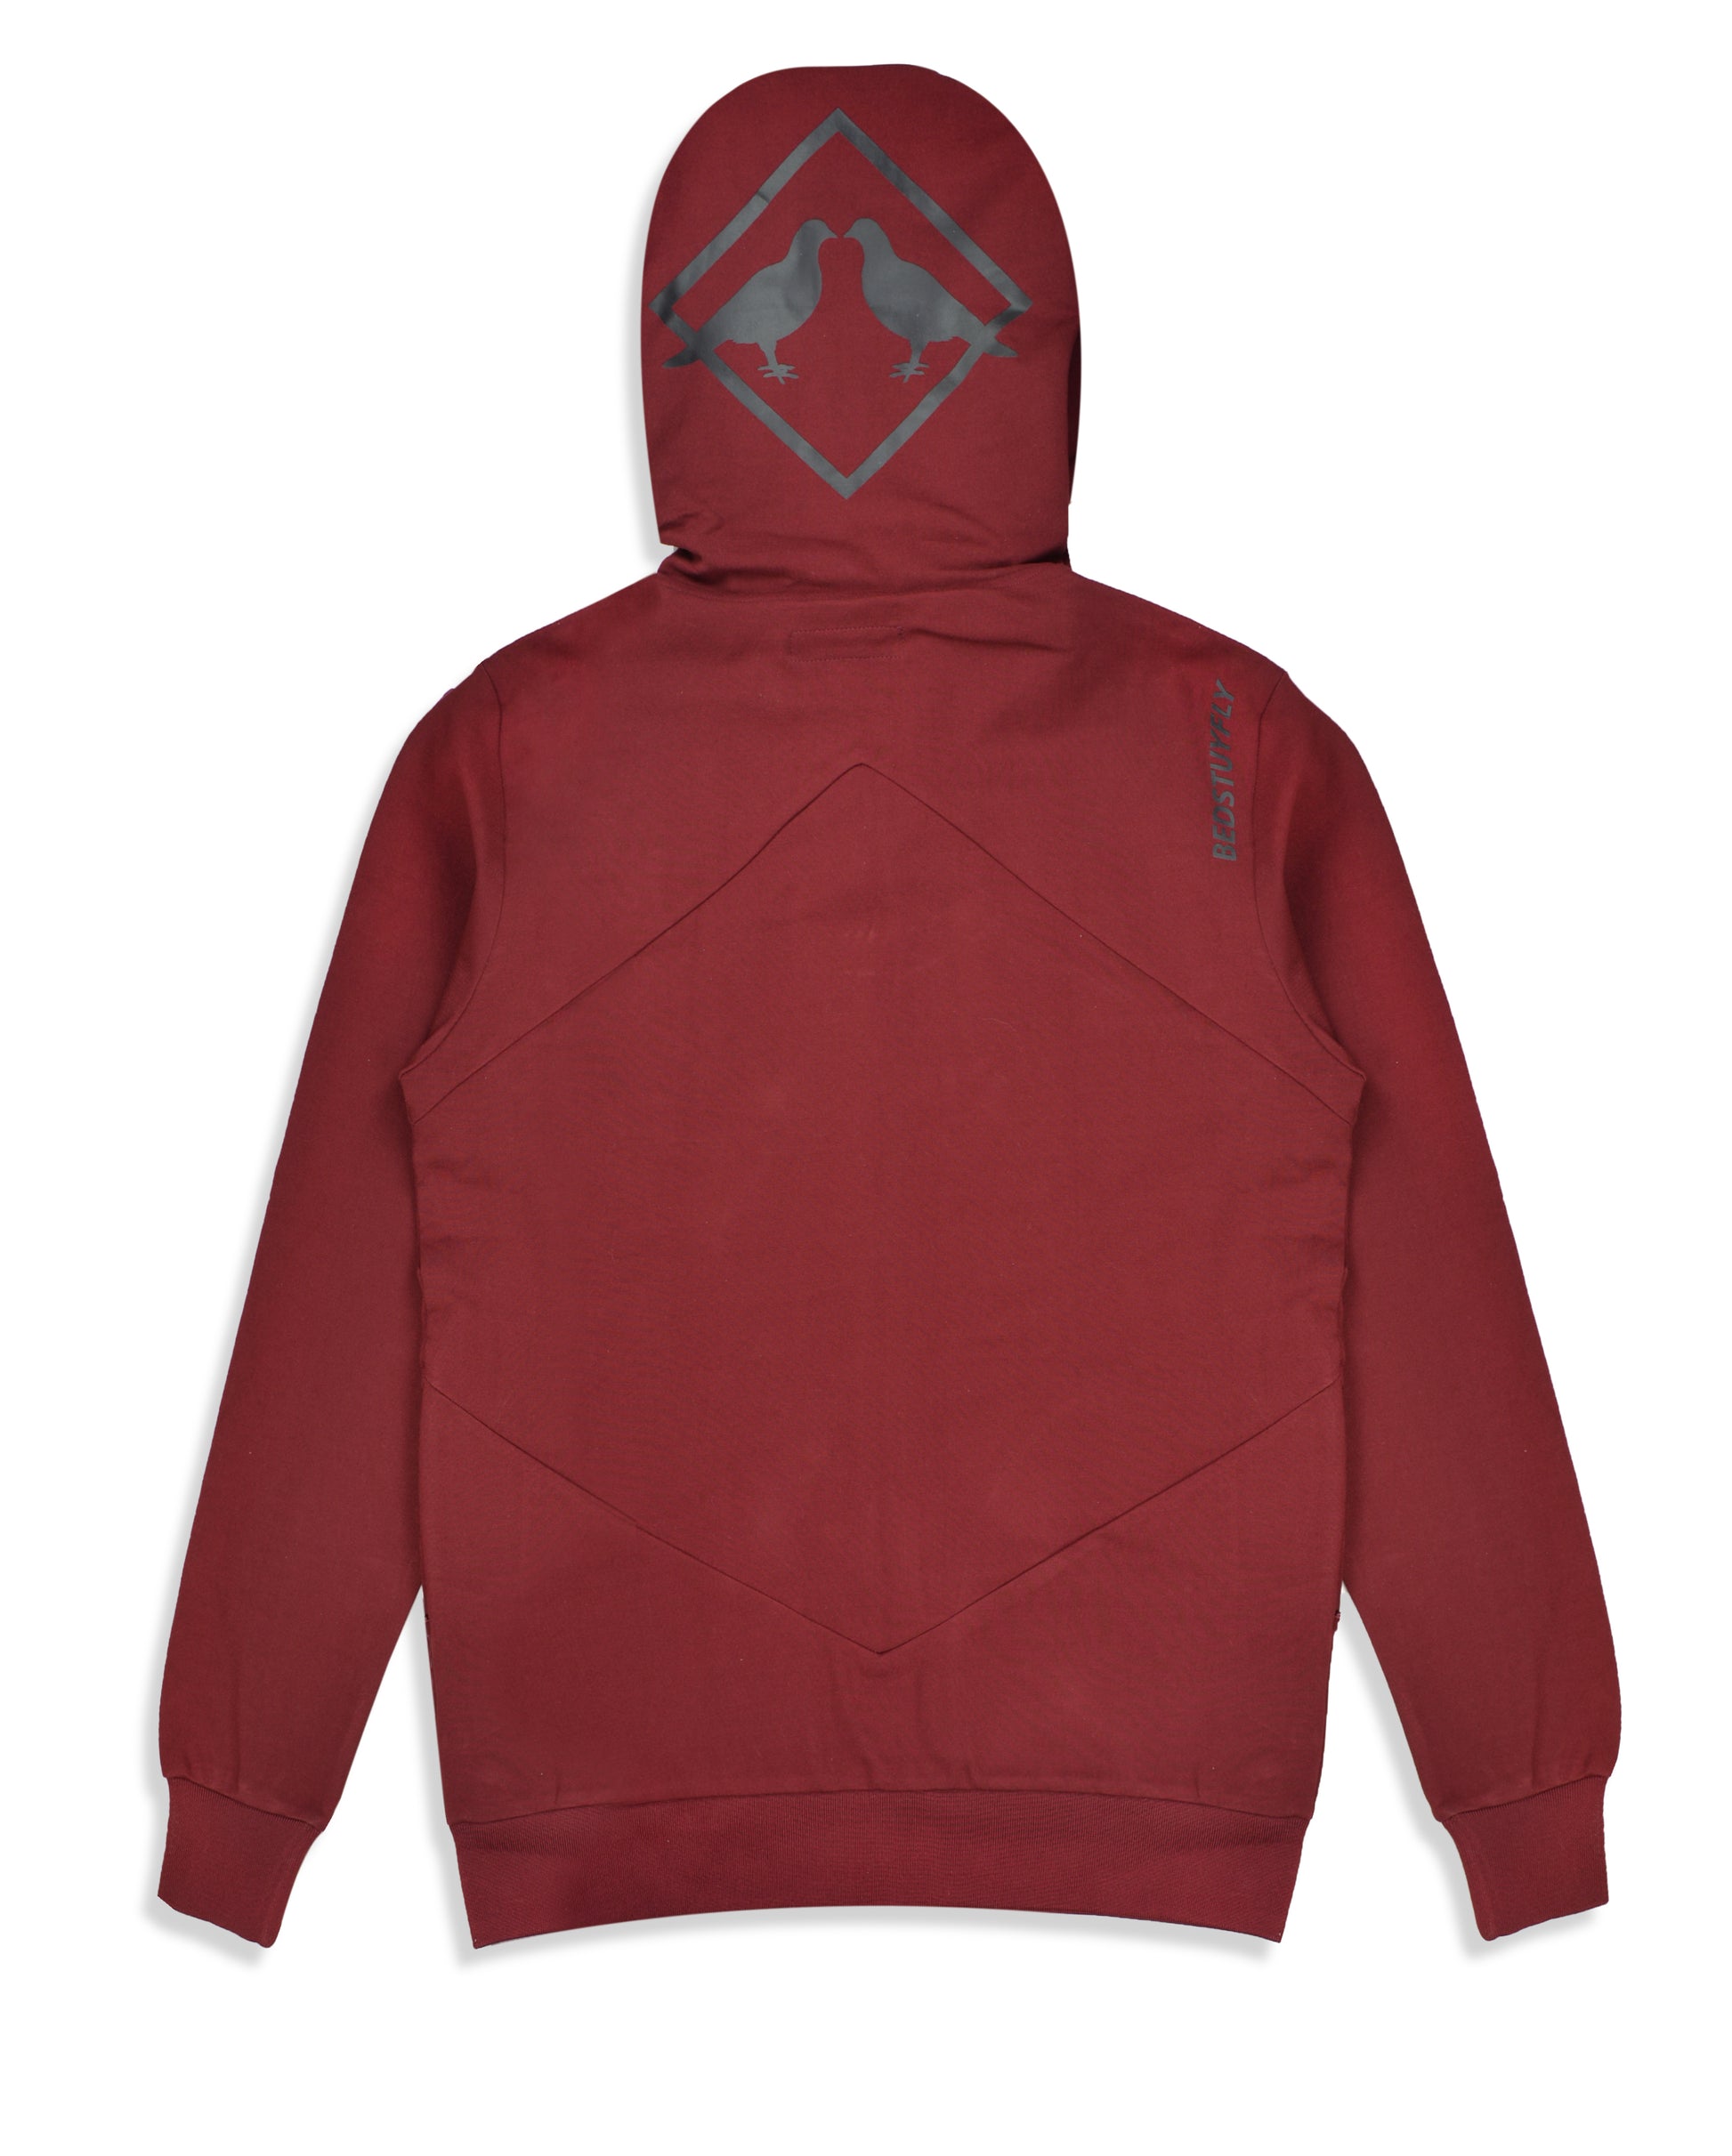 Private Collection Hoodie (Burgundy) - Bedstuyfly